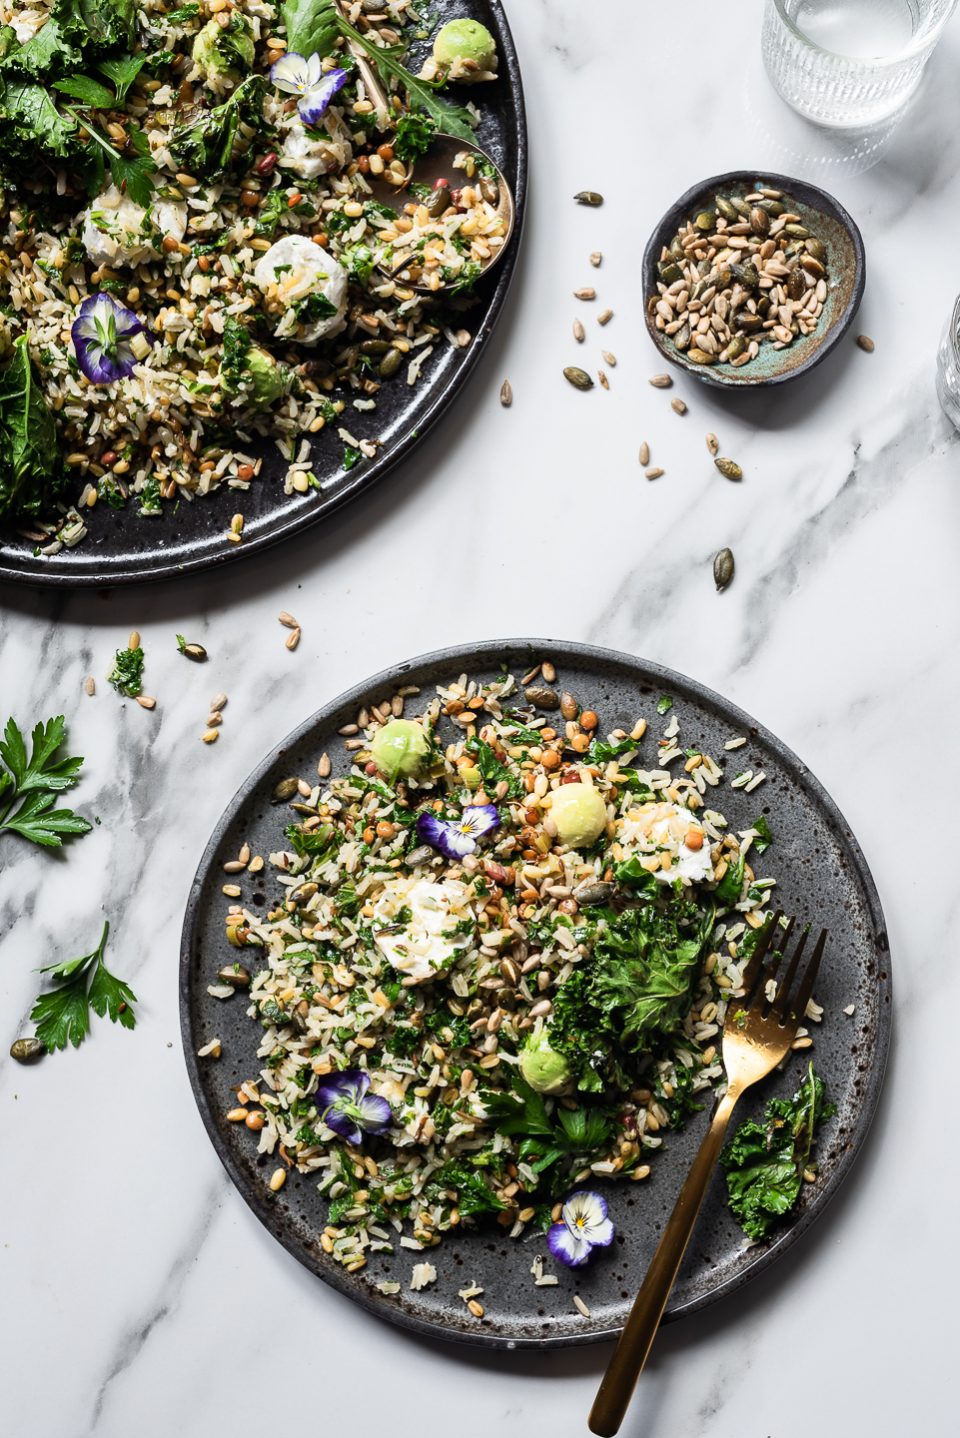 Wild rice and freekeh salad with kale and pomelo dressing